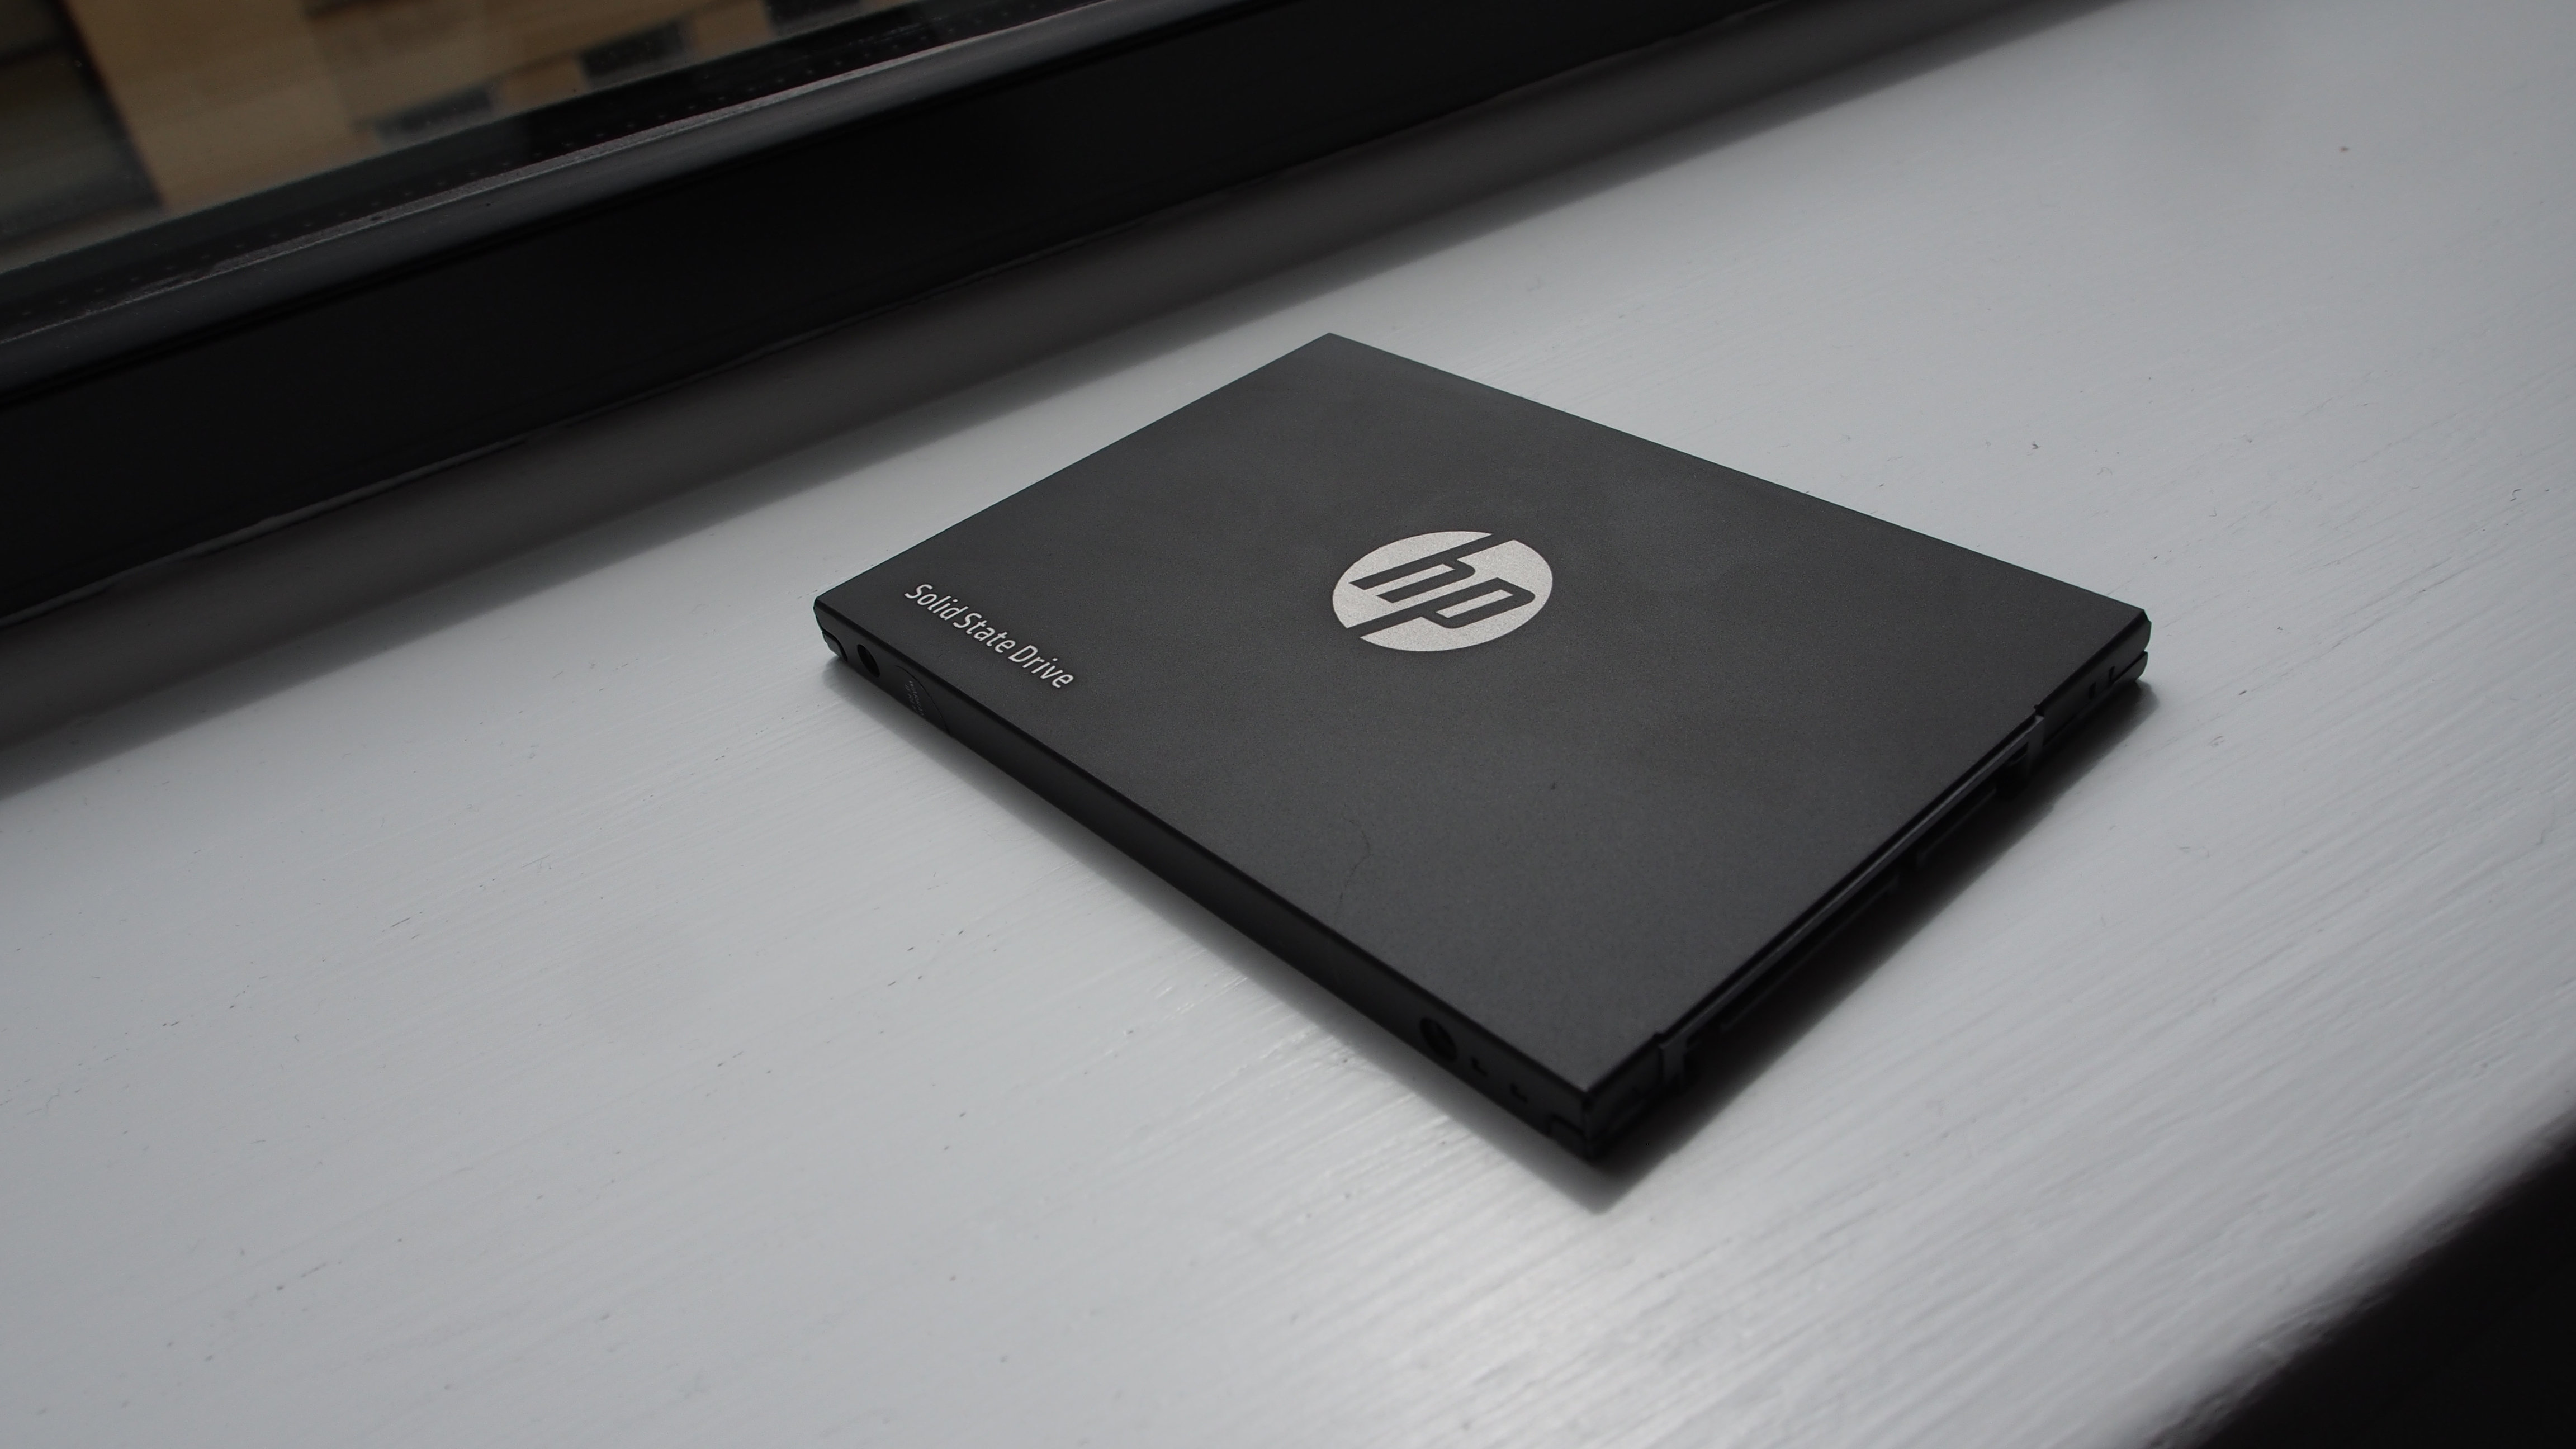 Insulate To take care blend HP S700 Pro SSD review | TechRadar